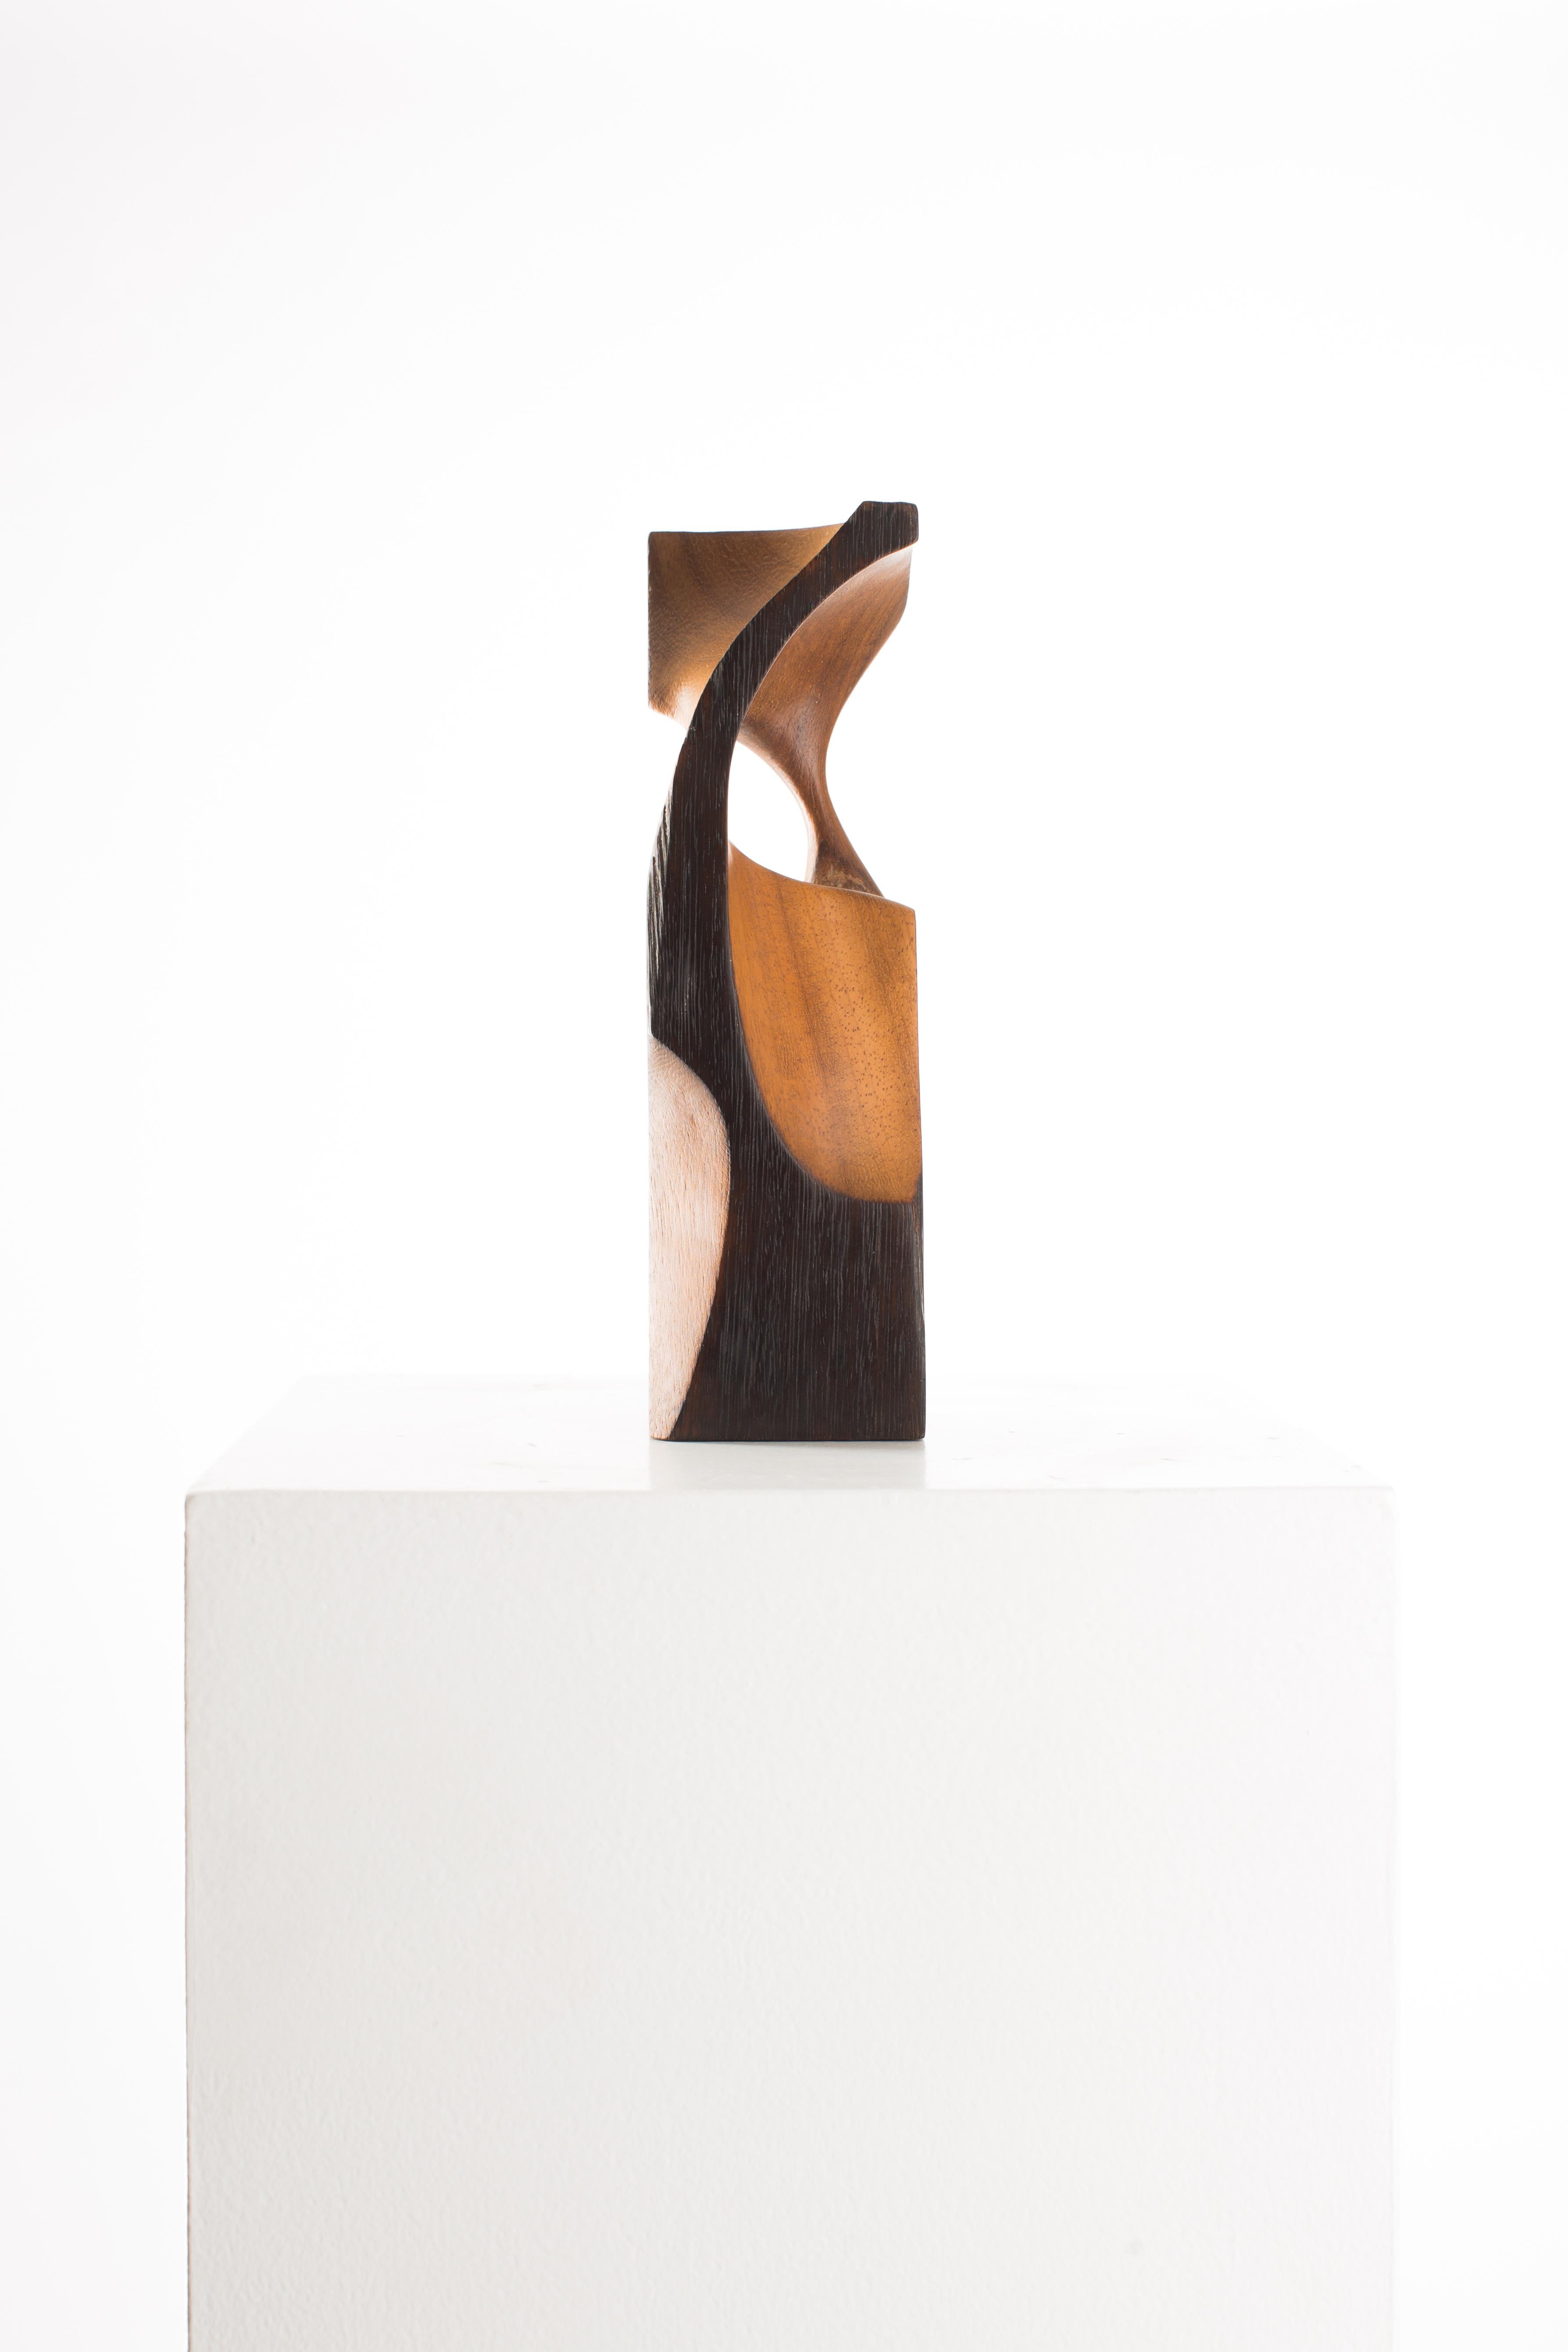 Black, Raw, Satin, Wood, Abstract, Contemporary, Modern, Sculpture For Sale 1